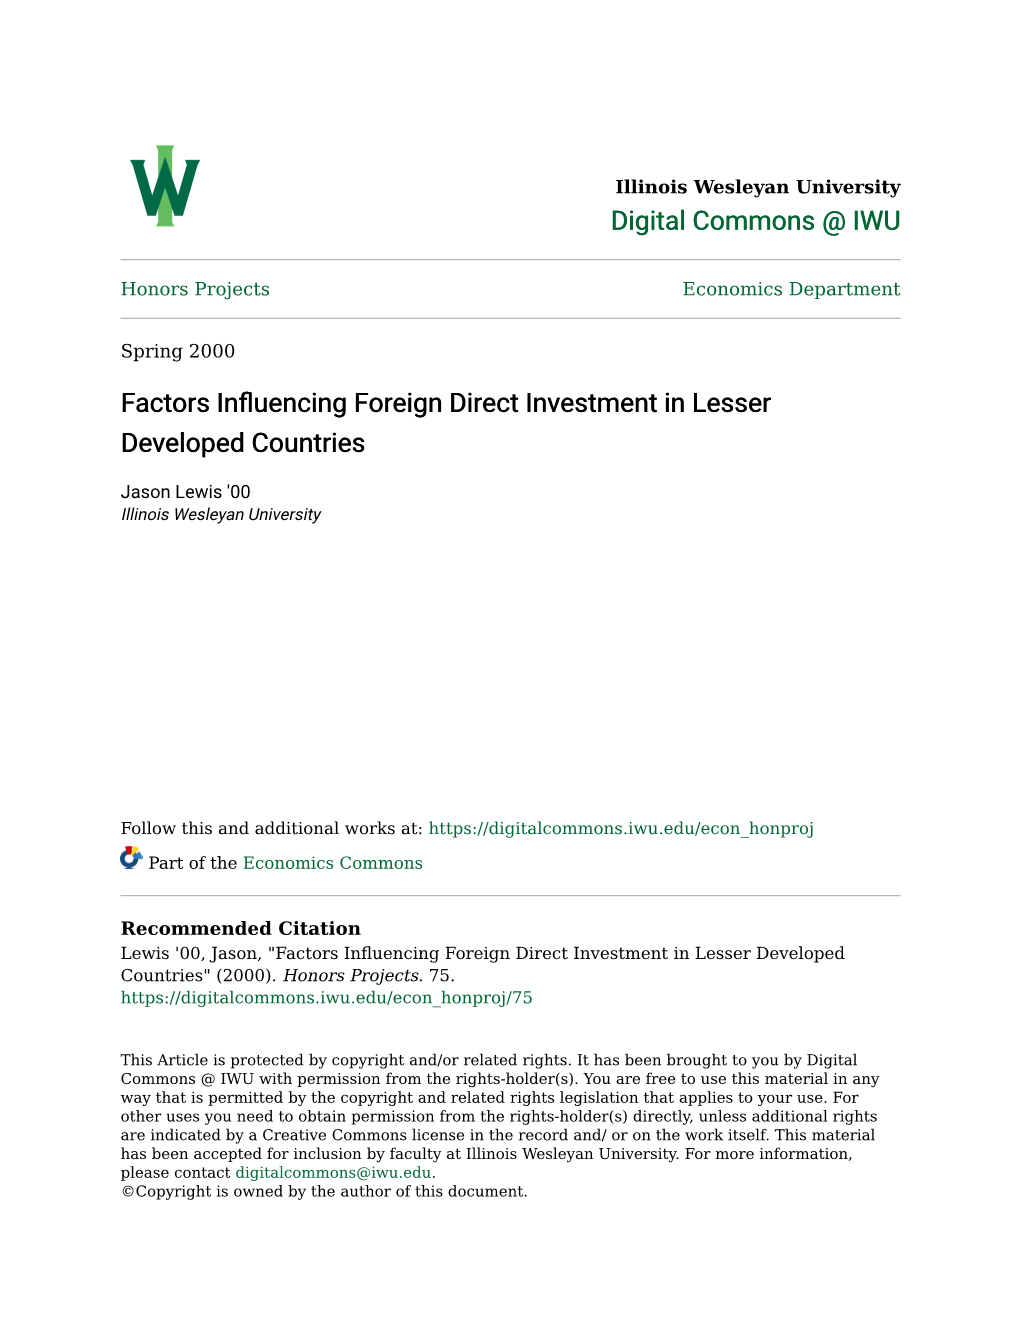 Factors Influencing Foreign Direct Investment in Lesser Developed Countries